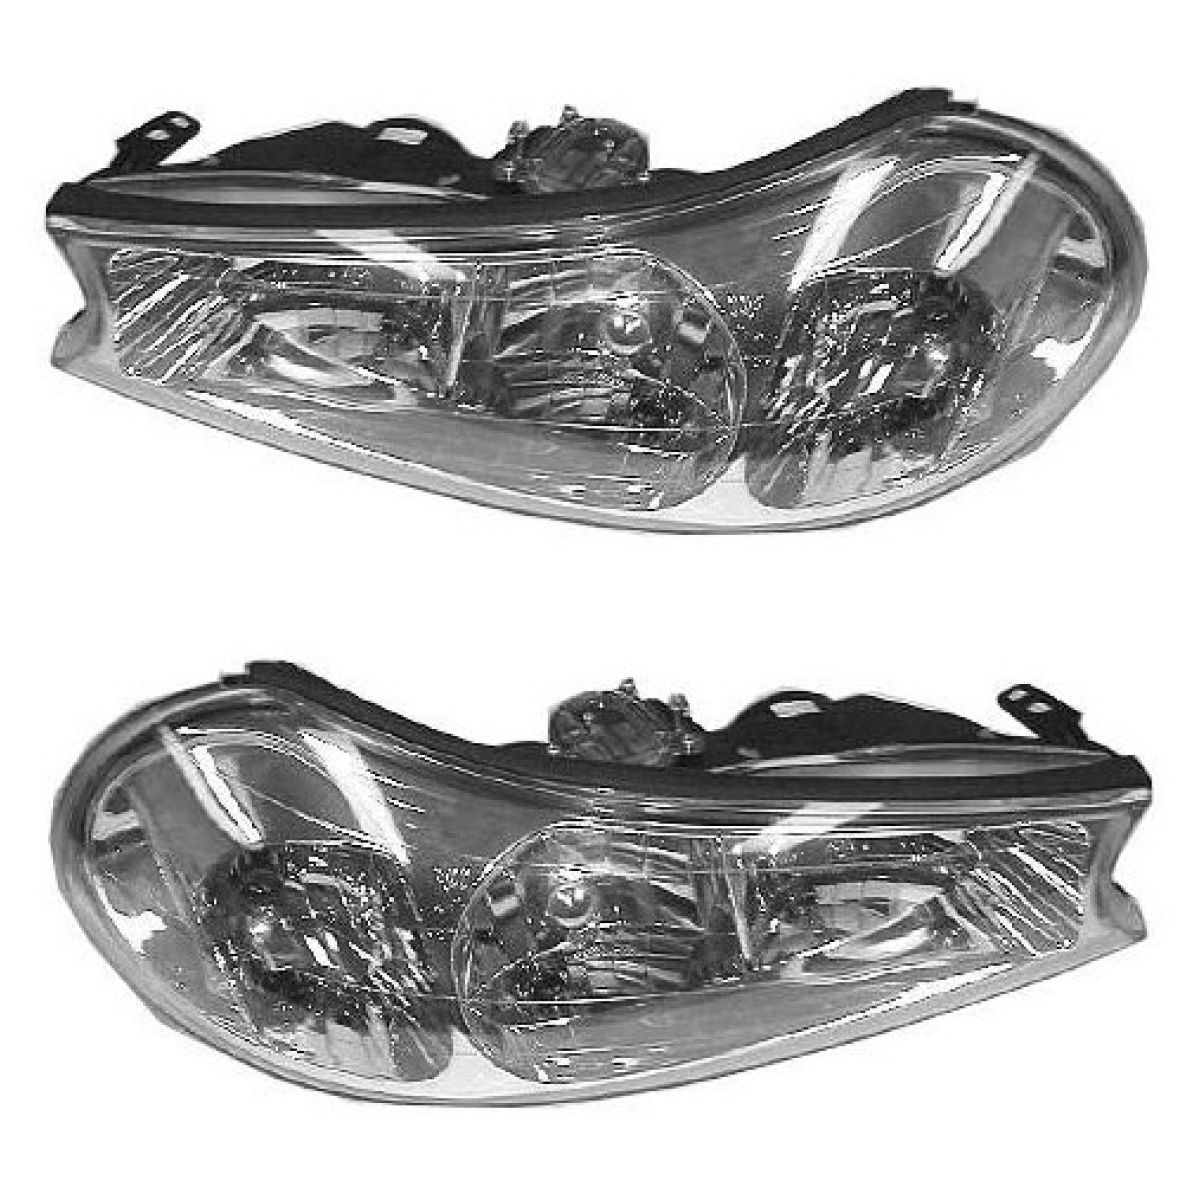 99 Ford contour headlights #1